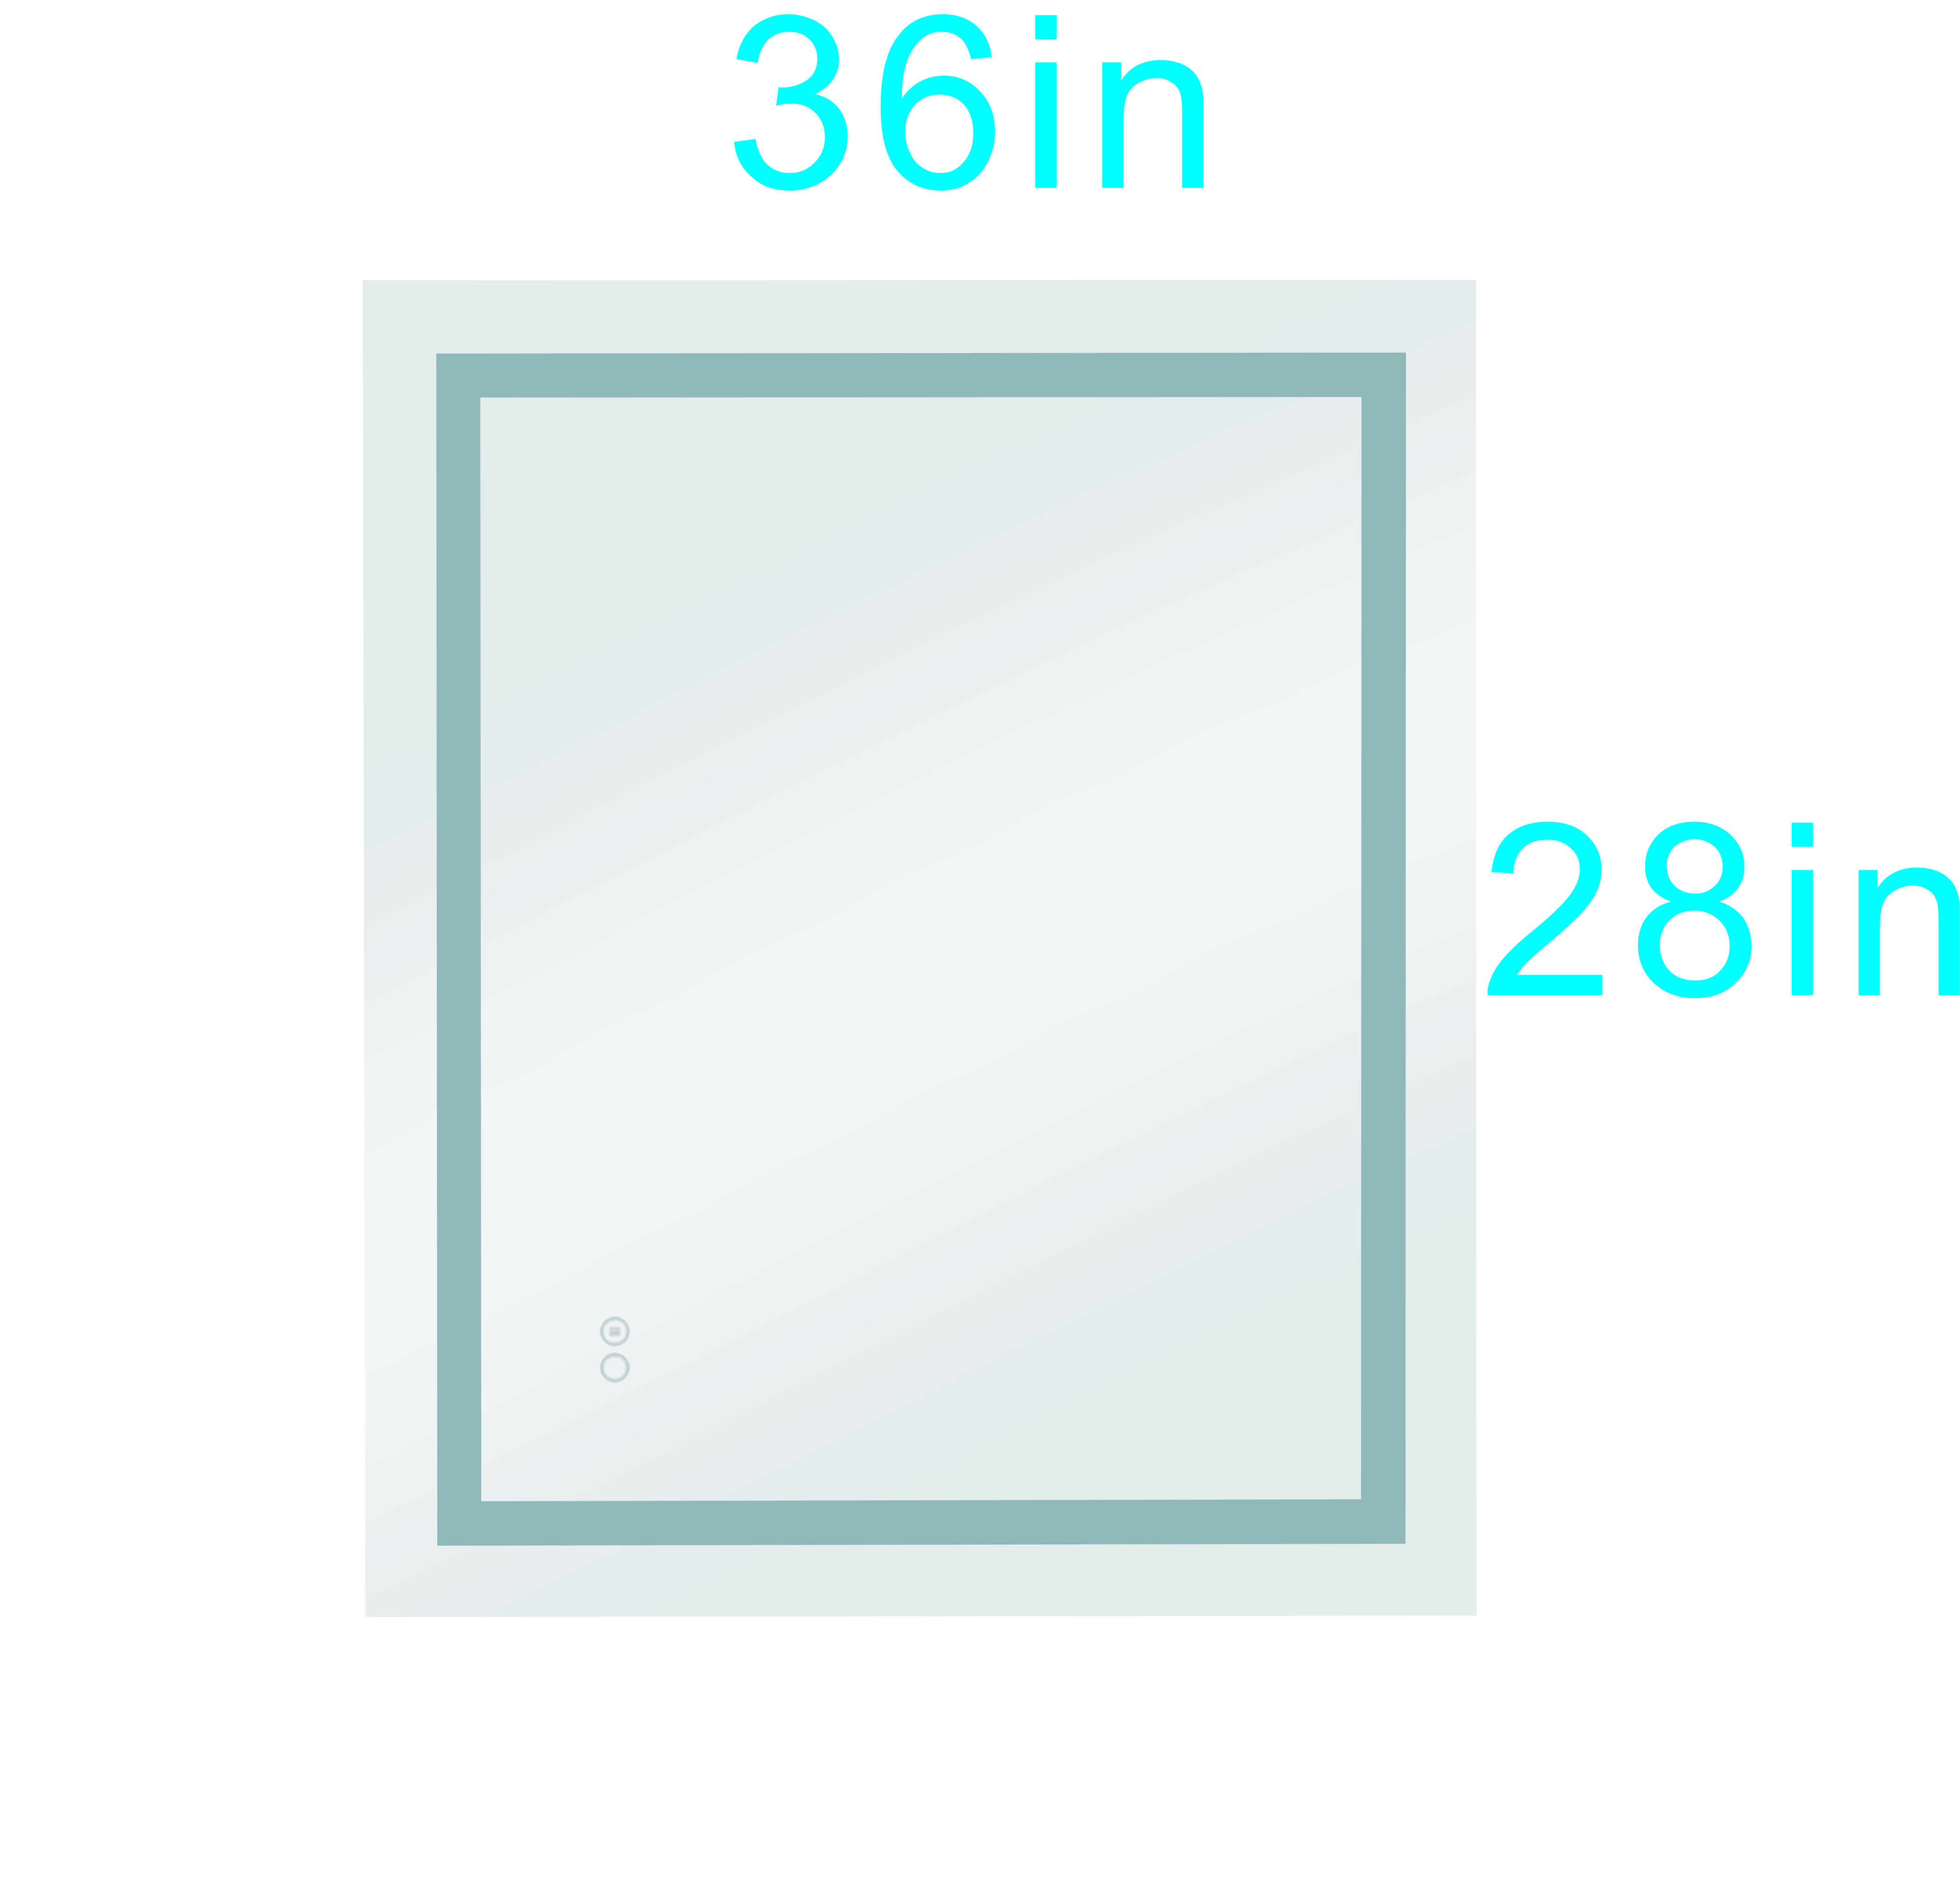 36x28 Inch LED Lighted Makeup Mirror For Bathroom Vanity With Touch Bottom For Color Temperature, BrightnessDefogger, Ultra-Thin Wall Mounted Mirror With High Lumen, Vertical/Horizontal-CASAINC